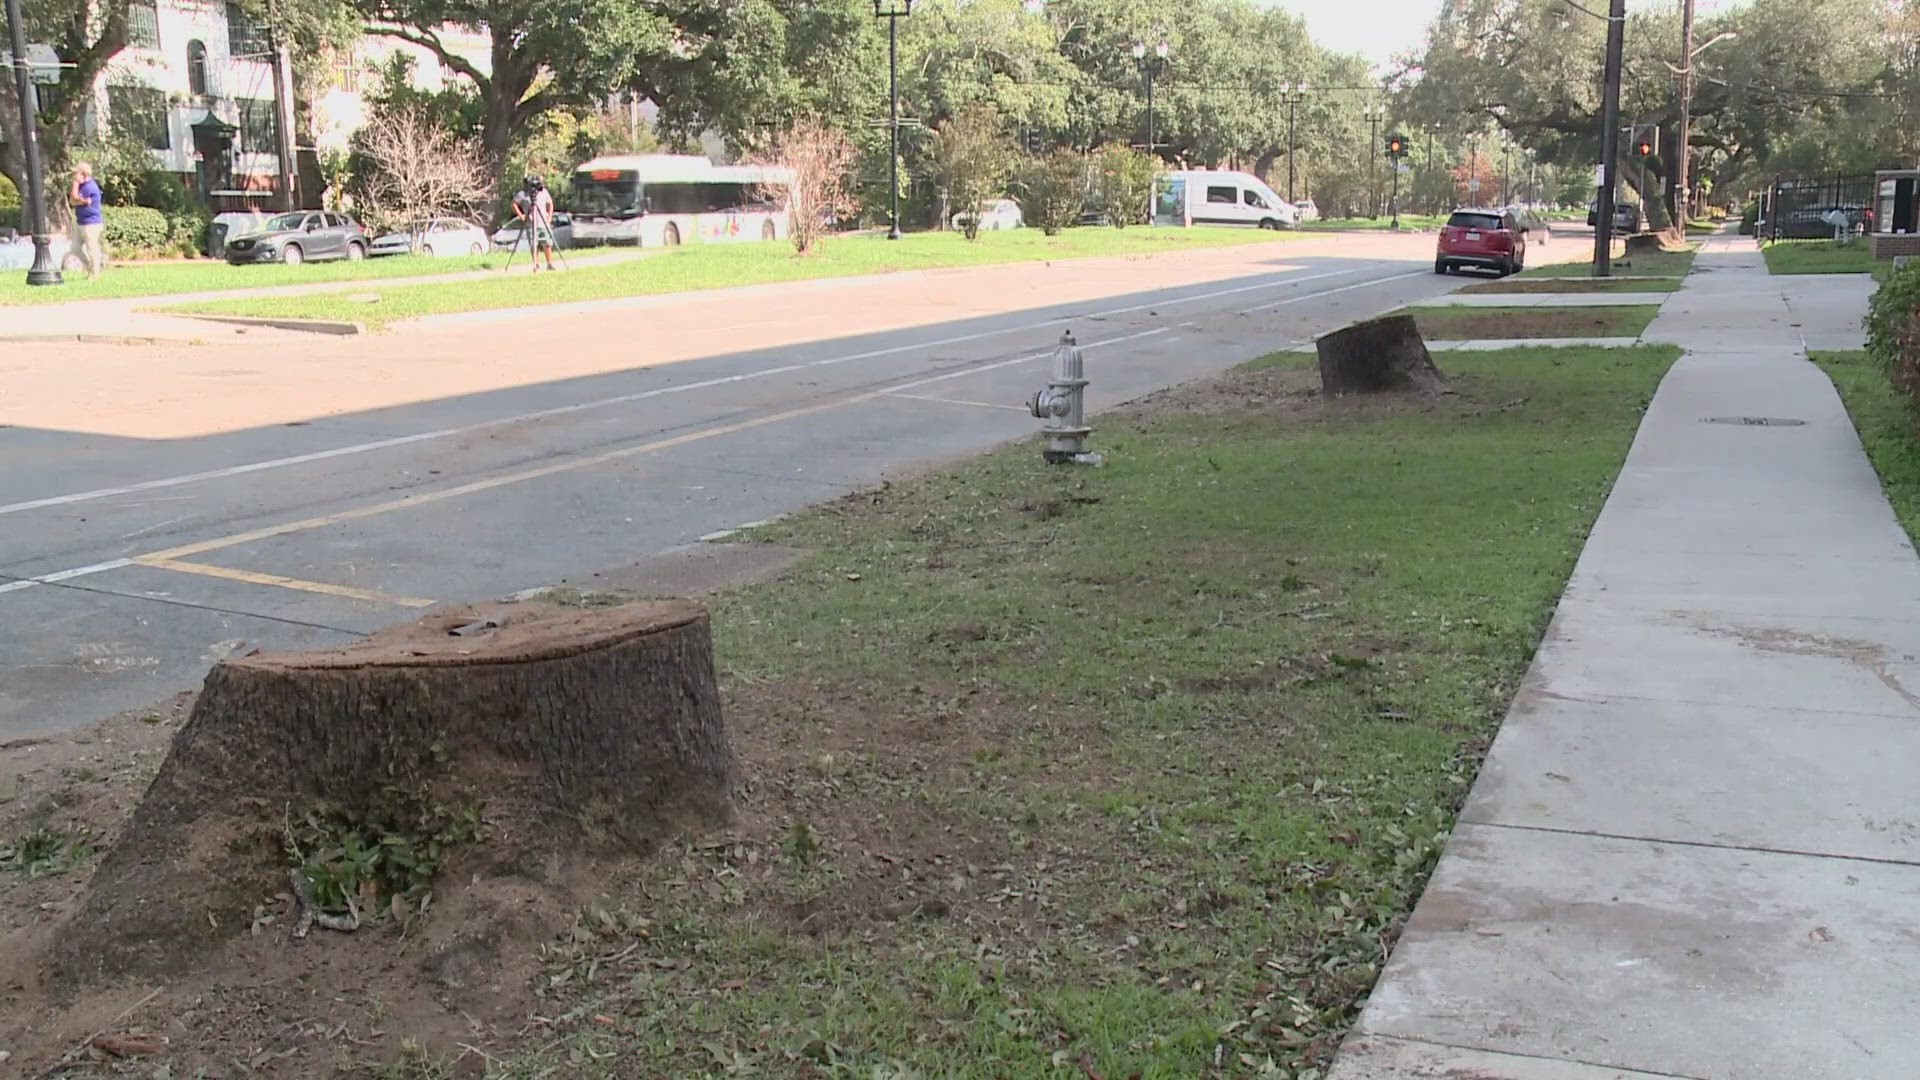 The city said the trees had to be removed because they were damaged nine years ago and had been in decline.